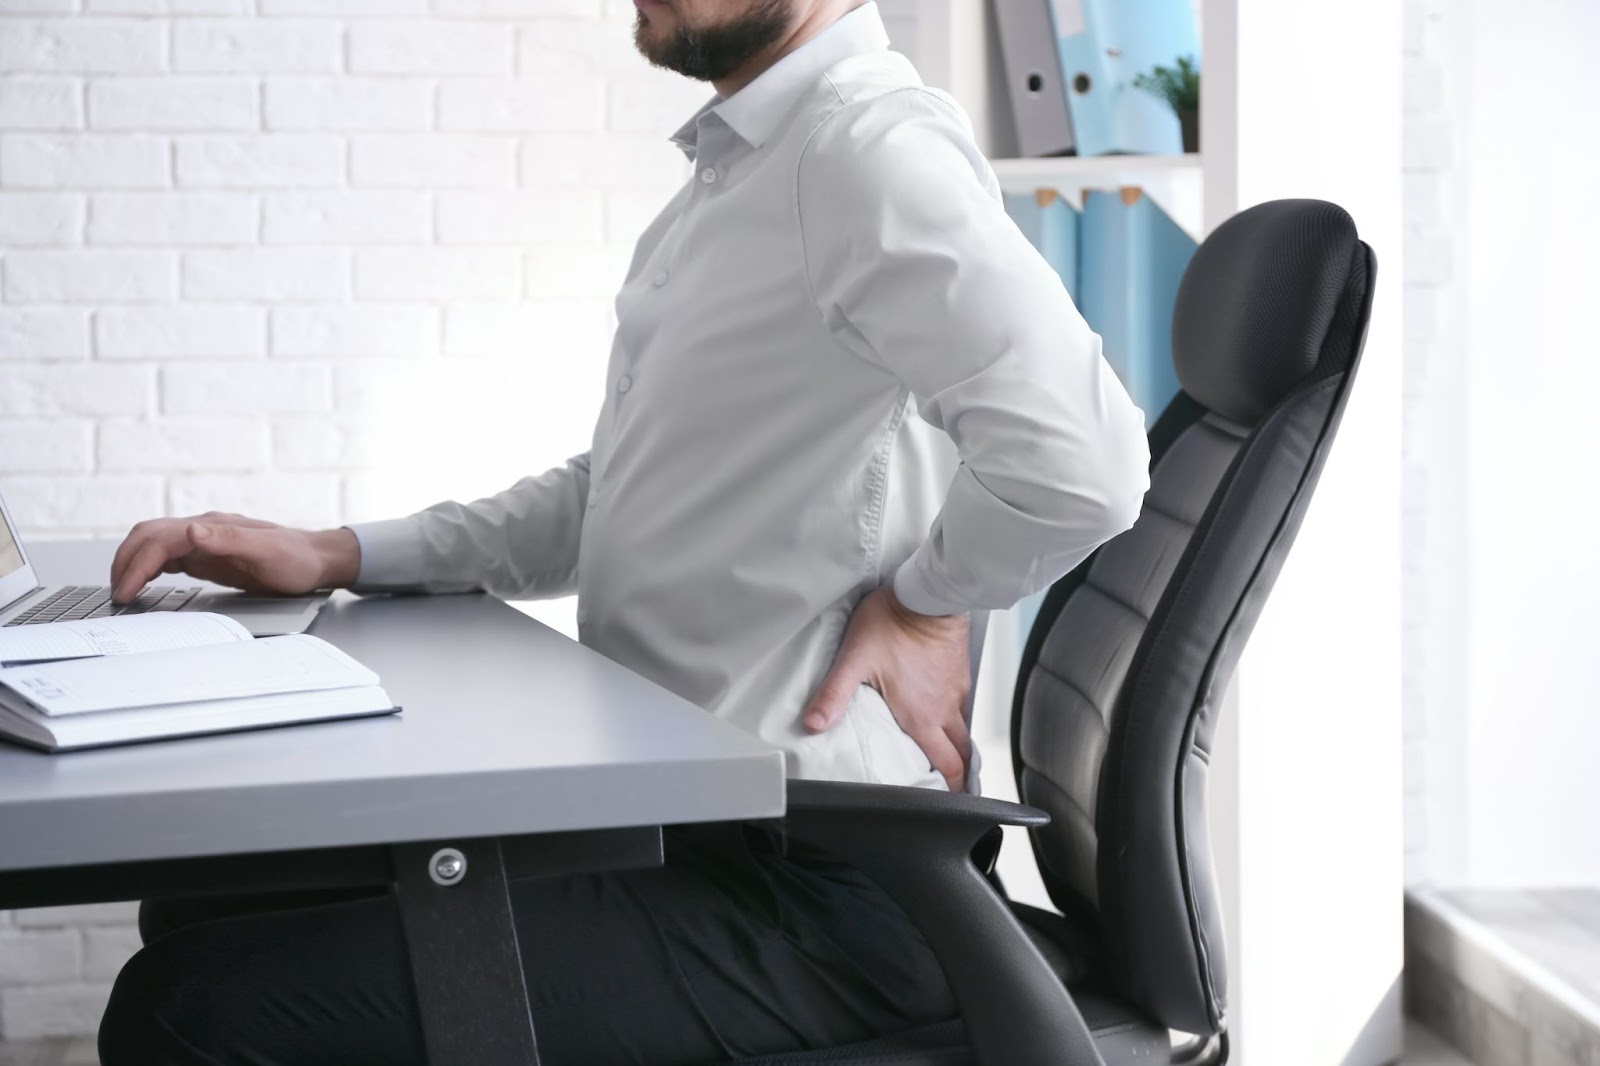 A man at a desk with back pain